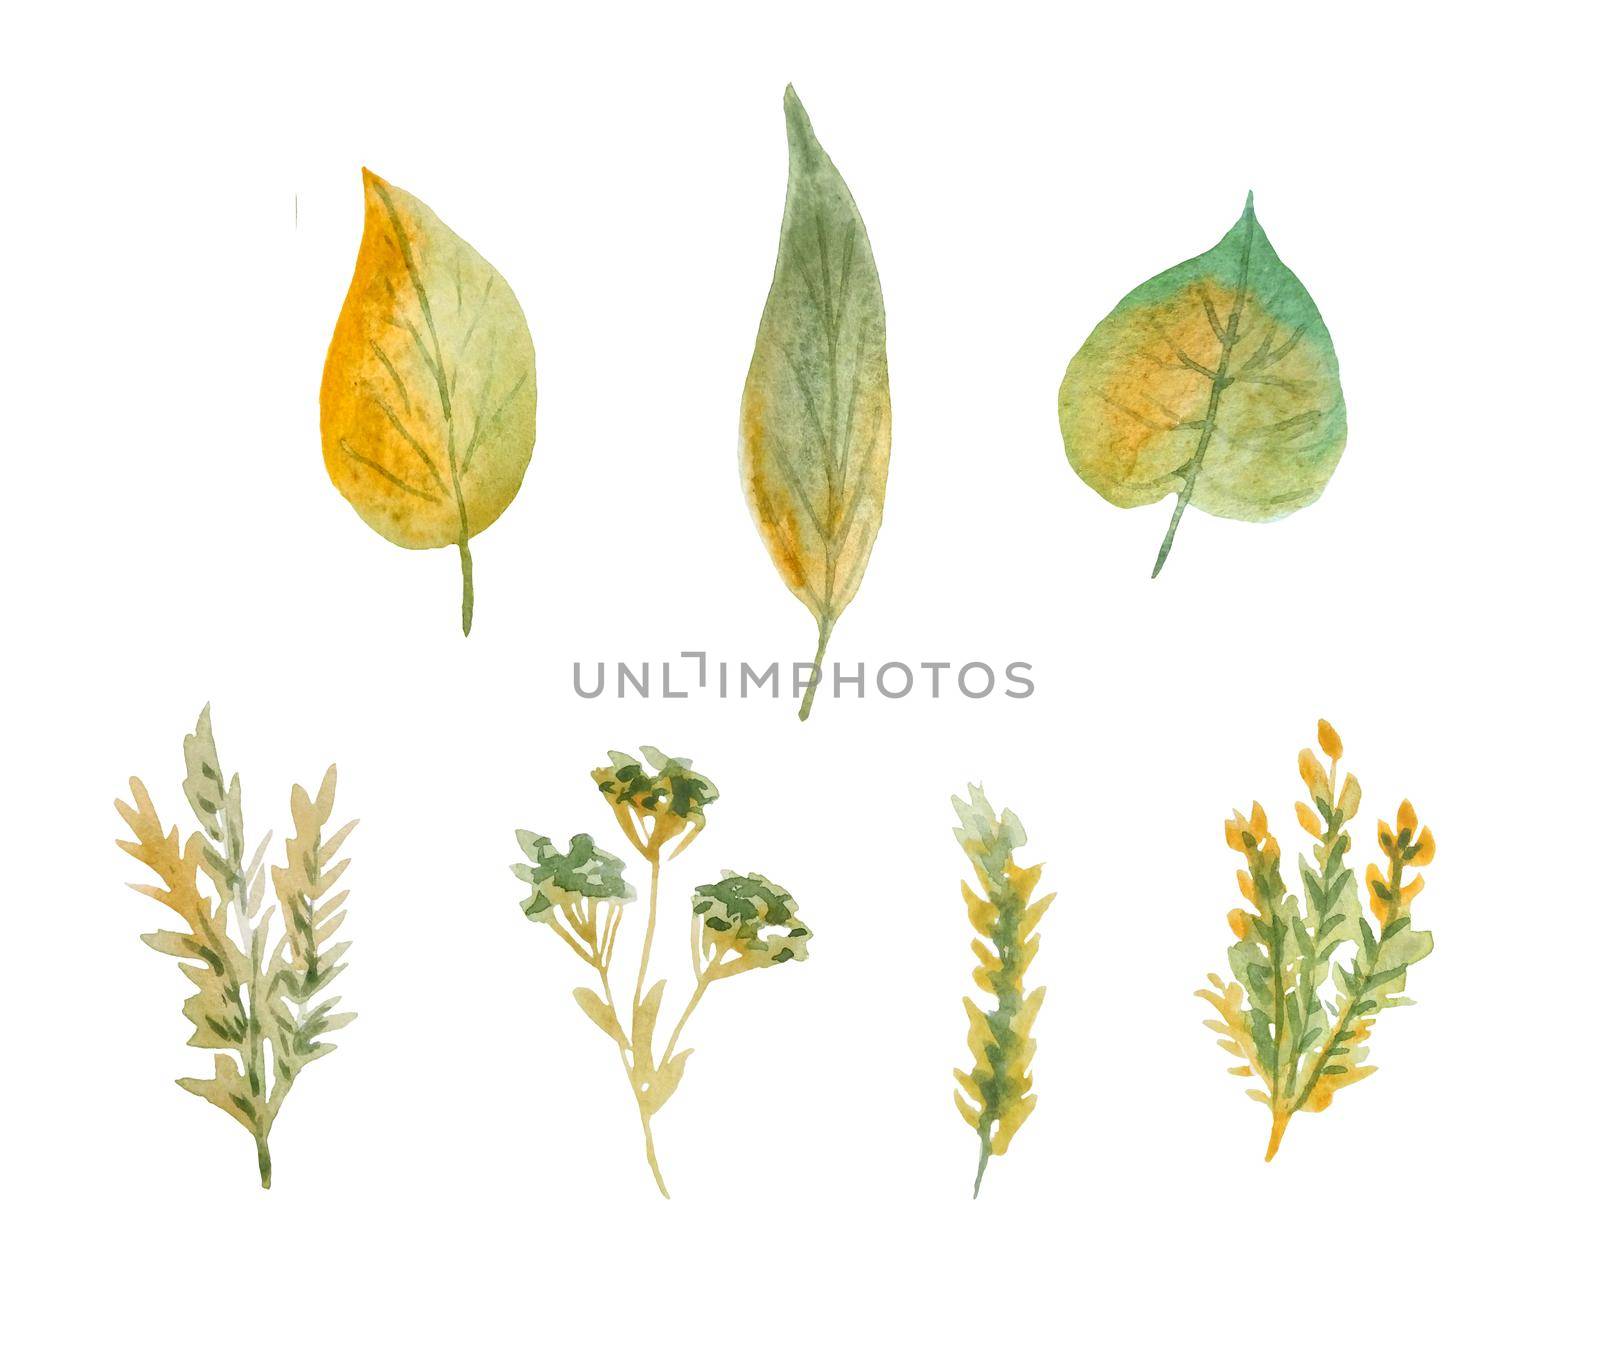 hand drawn watercolor illustration elements with green yellow wild herbs leaves in wood woodland forest. Organic natural plants, floral botanical design for wallpapers textile wrapping paper. Minimalism fall autumn design